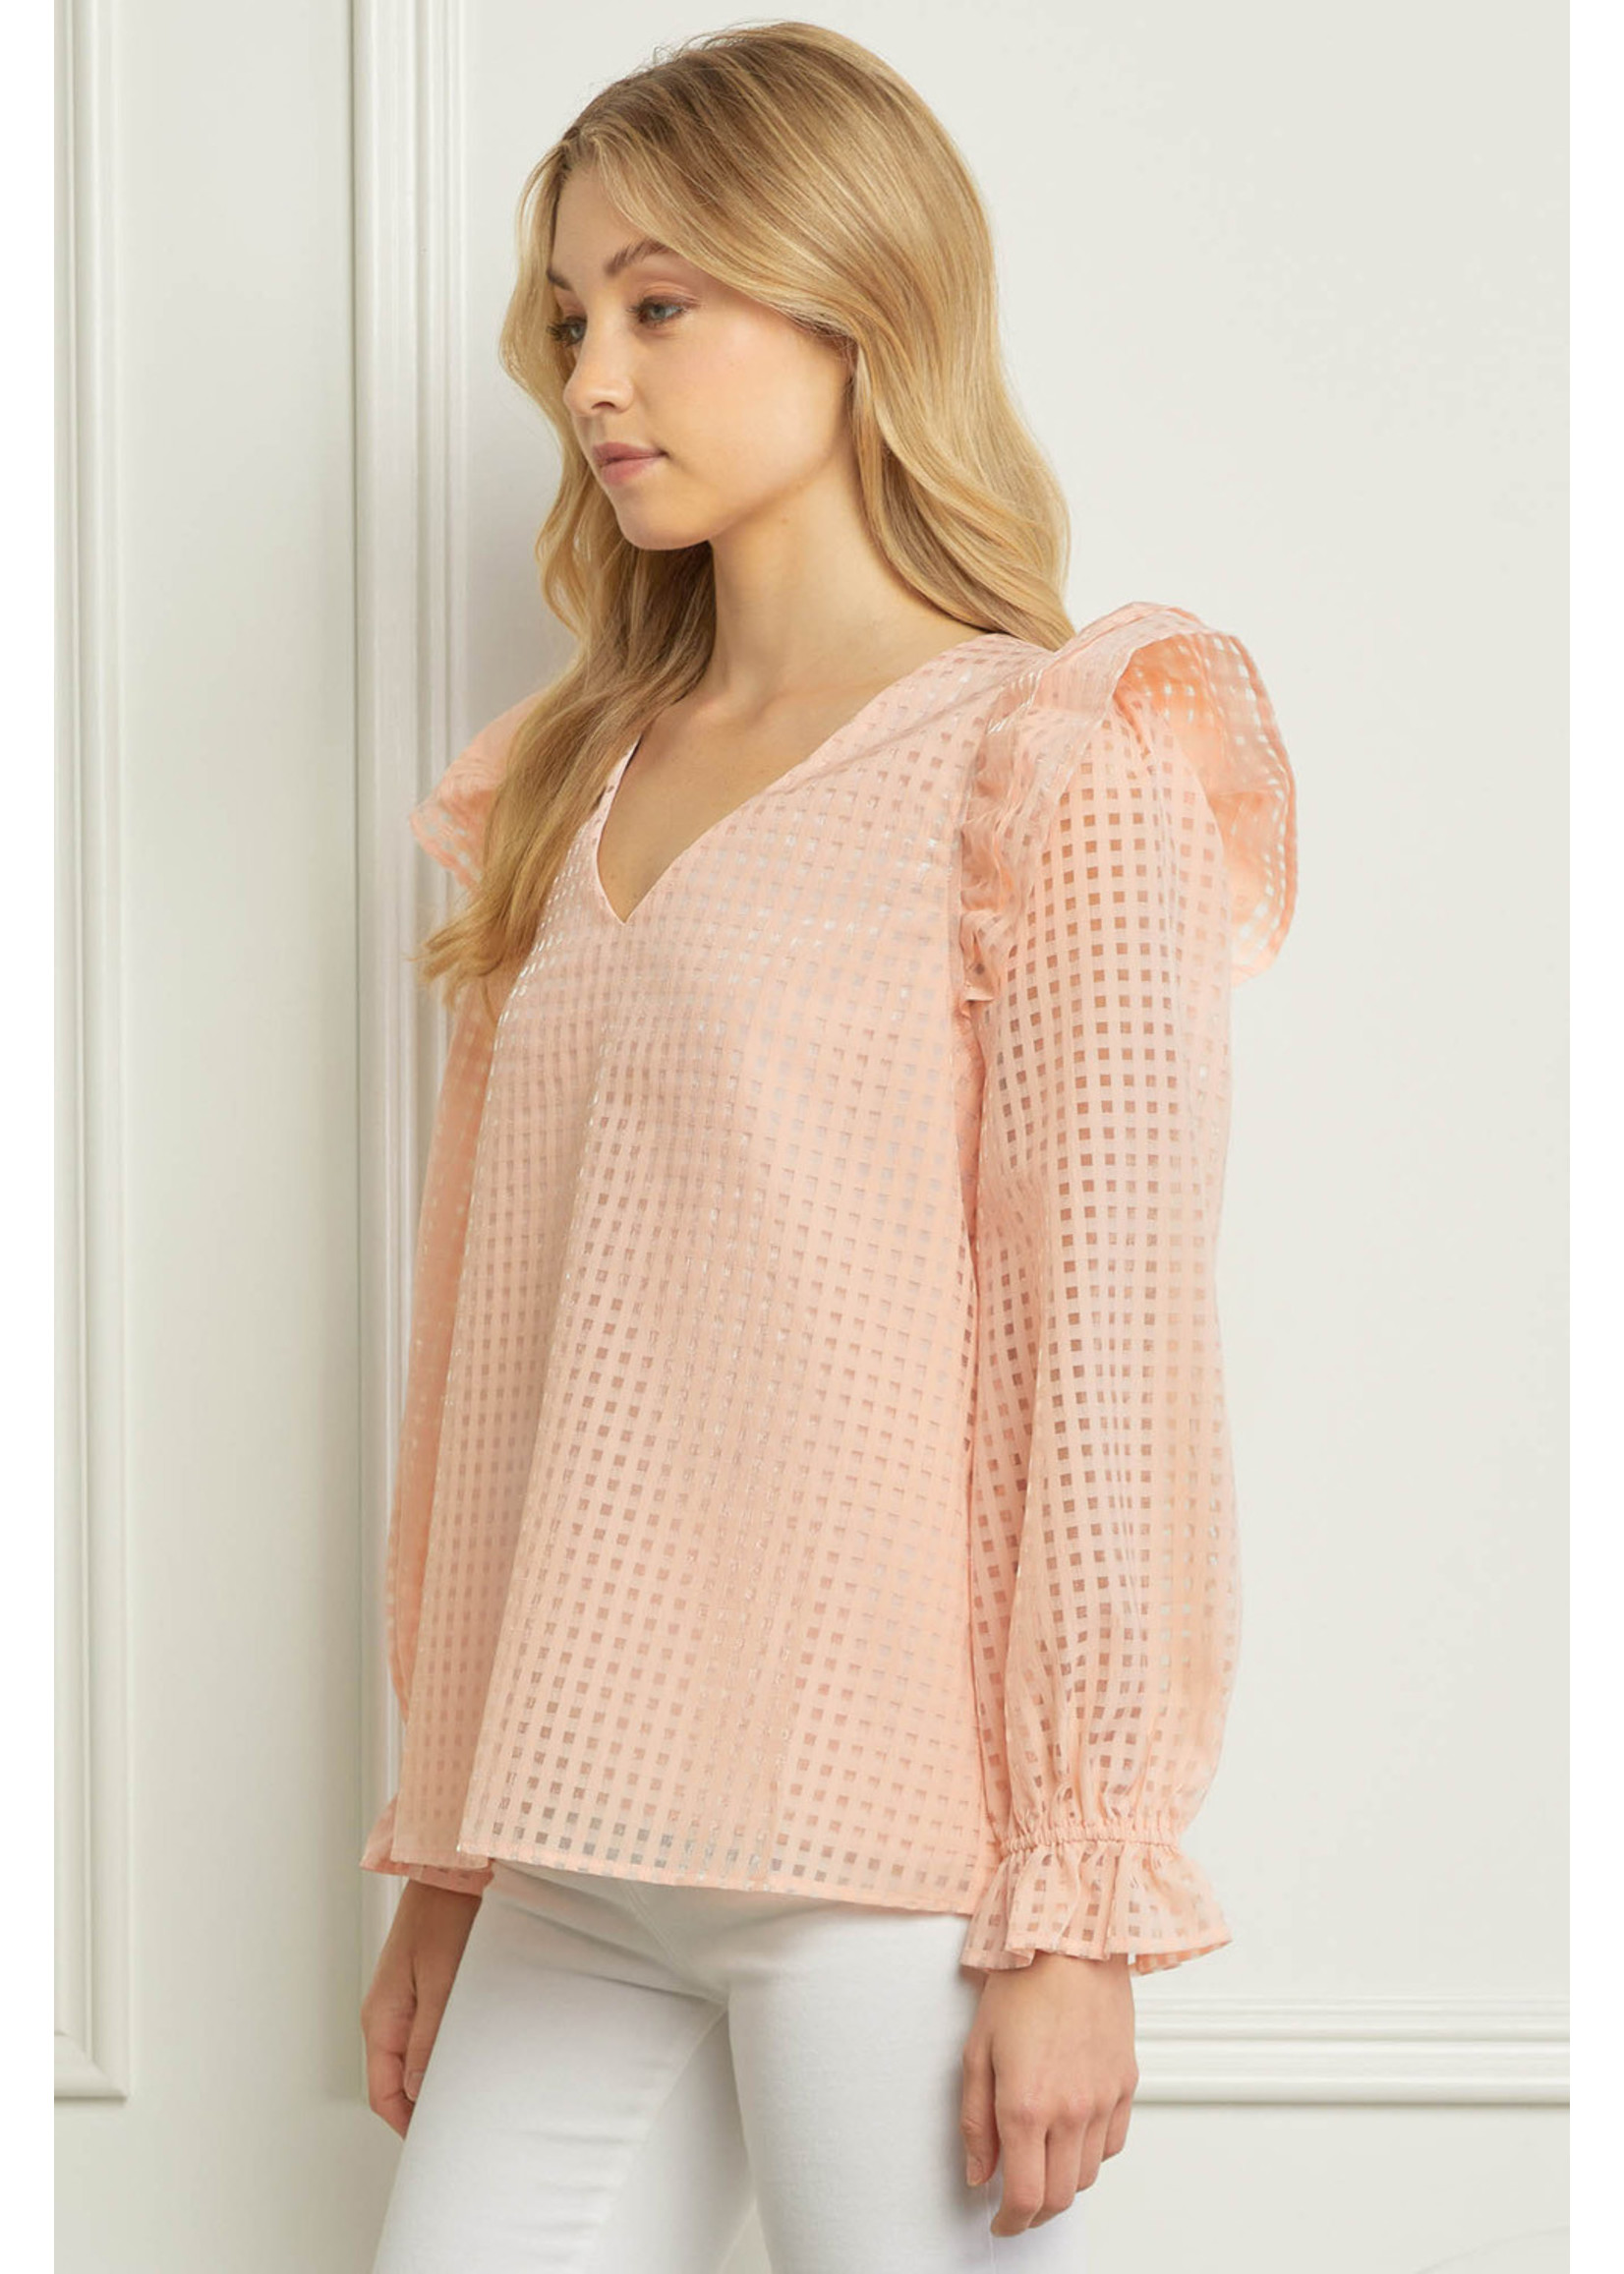 The Cassie Ruffled Gingham Top